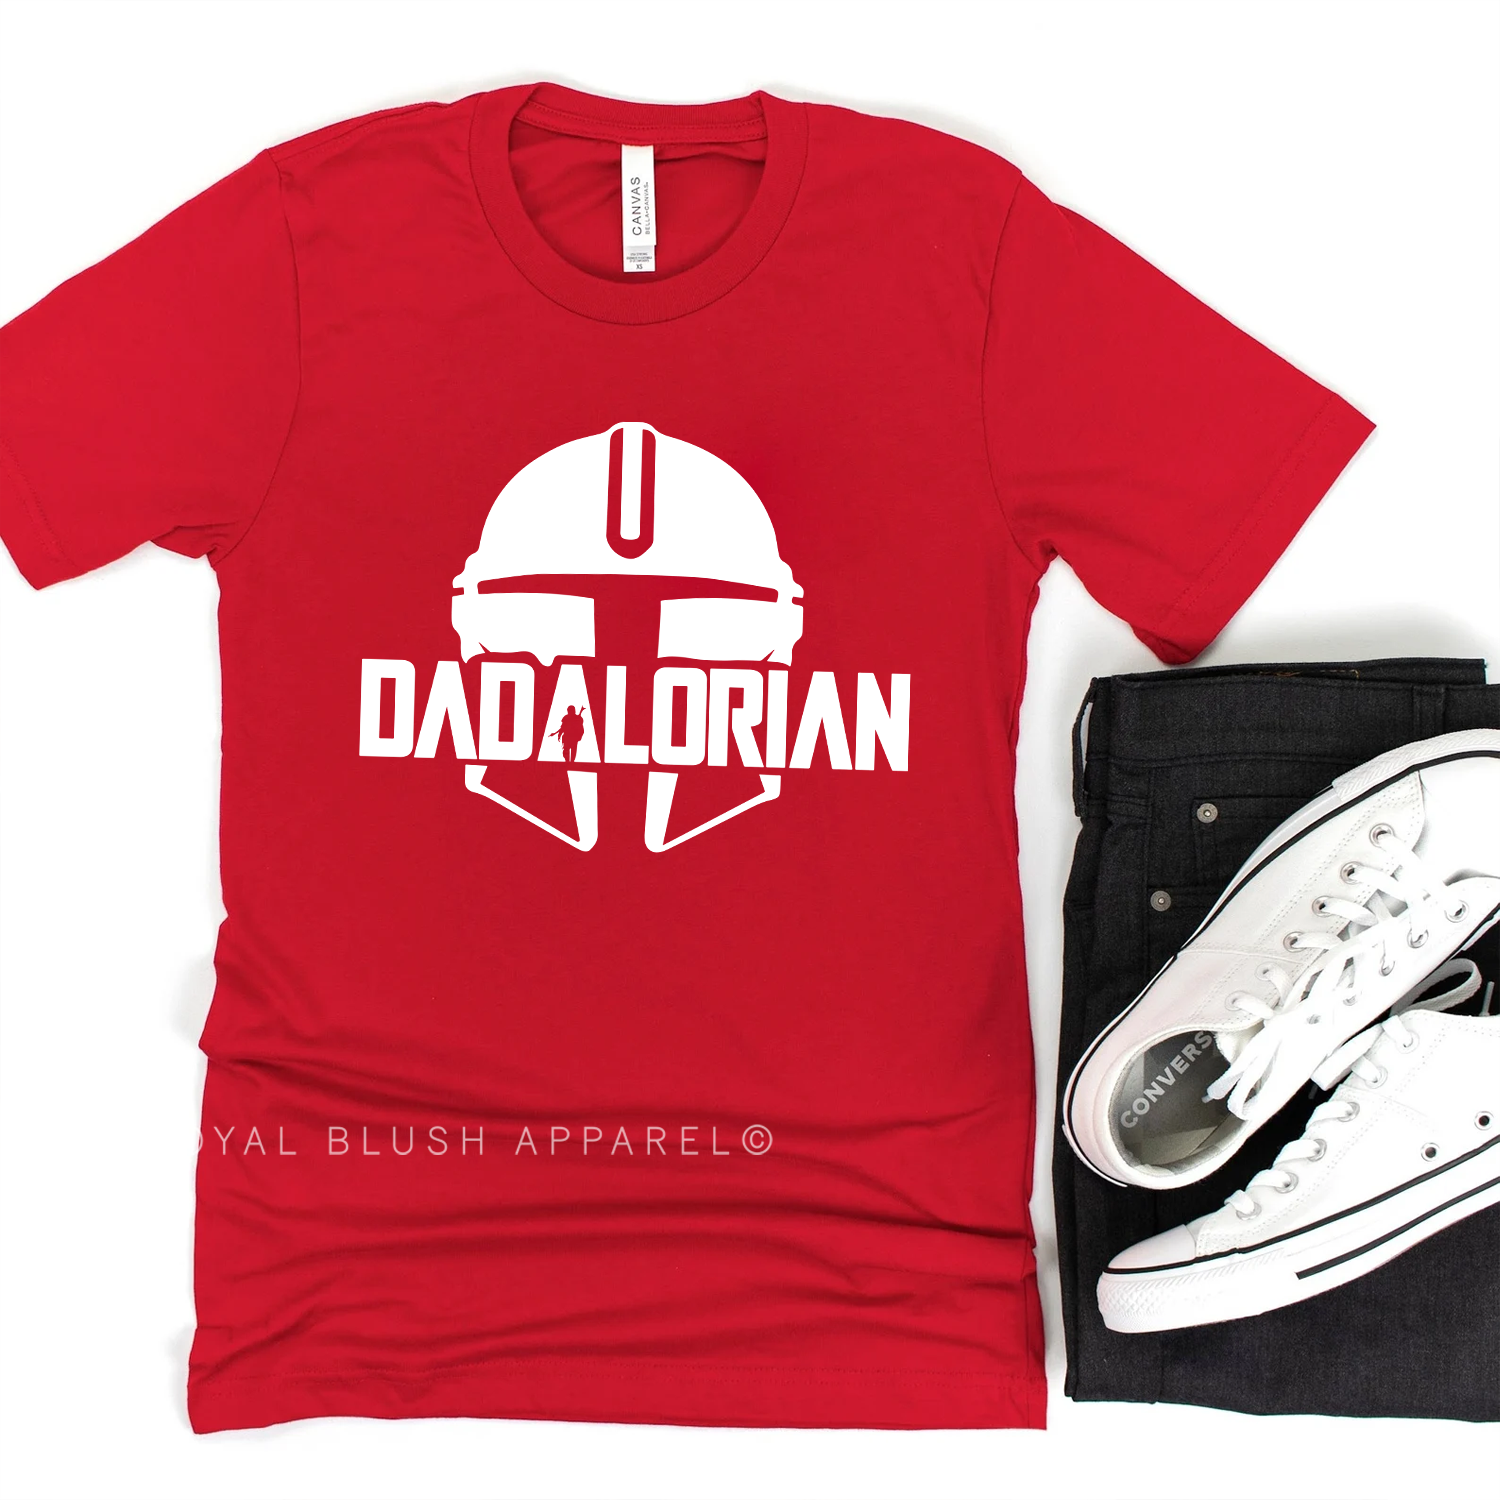 Dadalorian - 3XL RED SOFTSTYLE T-SHIRT